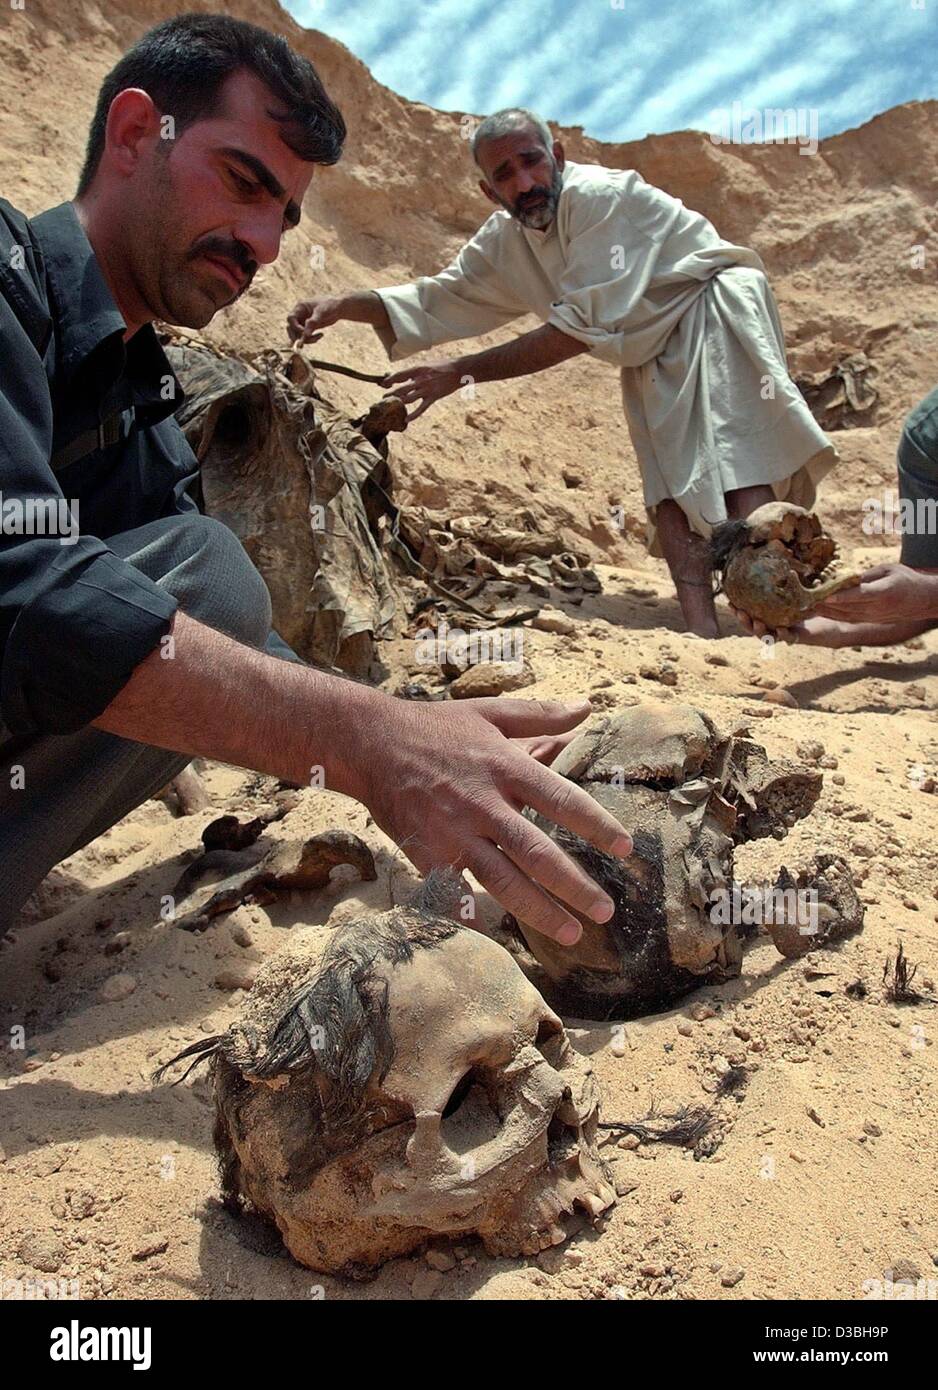 (dpa) - Some Iraqi men exhume the bones of dead Arabs in a mass grave in the desert 20 km south of the city of Karbala, Iraq, 2 May 2003. The victims were killed and buried during the uprising of the Shiites in 1991 by the regime of ousted Iraqi President Saddam Hussein. Stock Photo